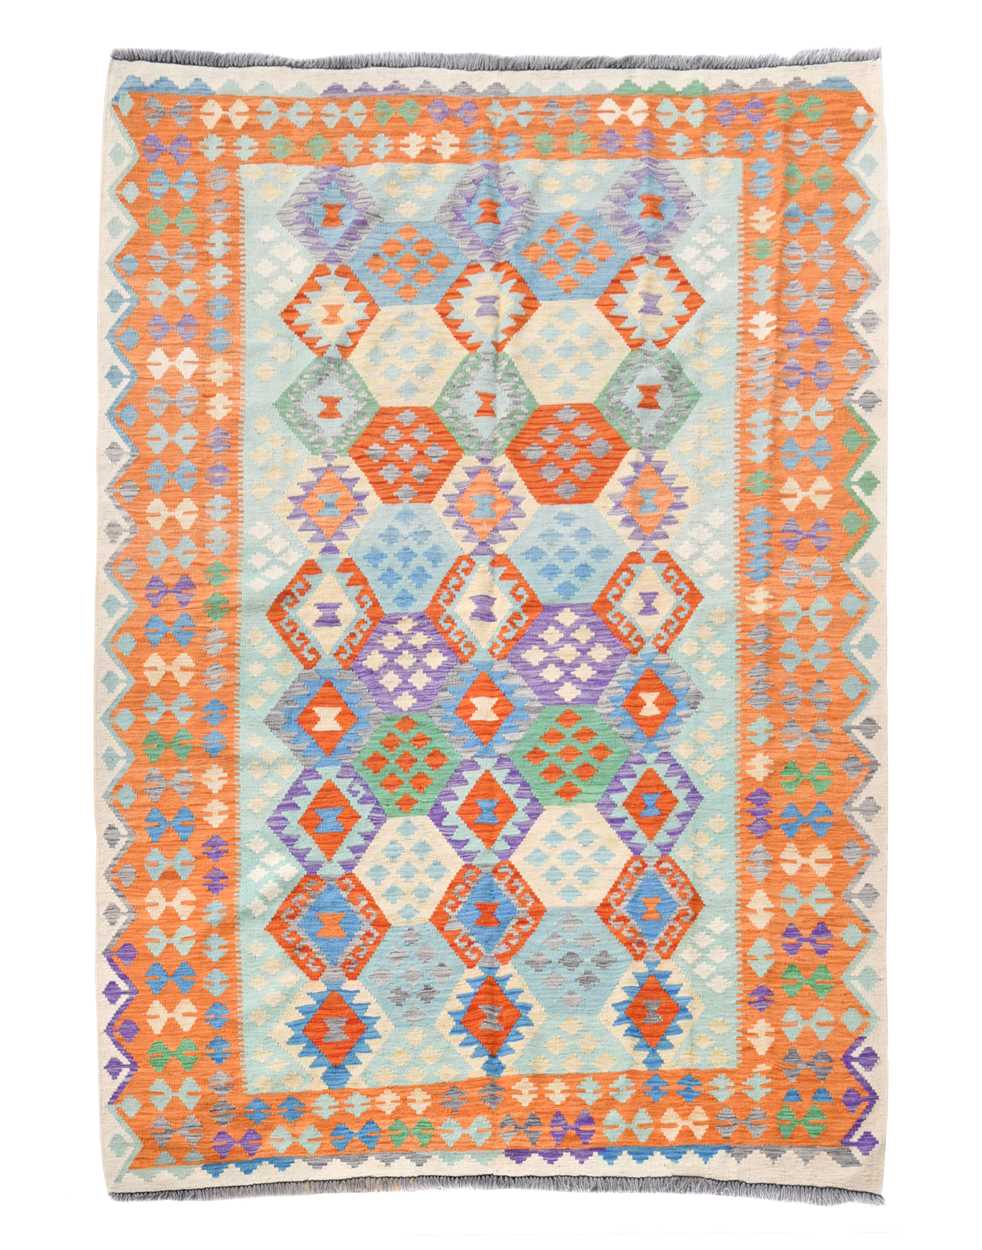 A hand-knotted pure wool kilim carpet, 20th century,